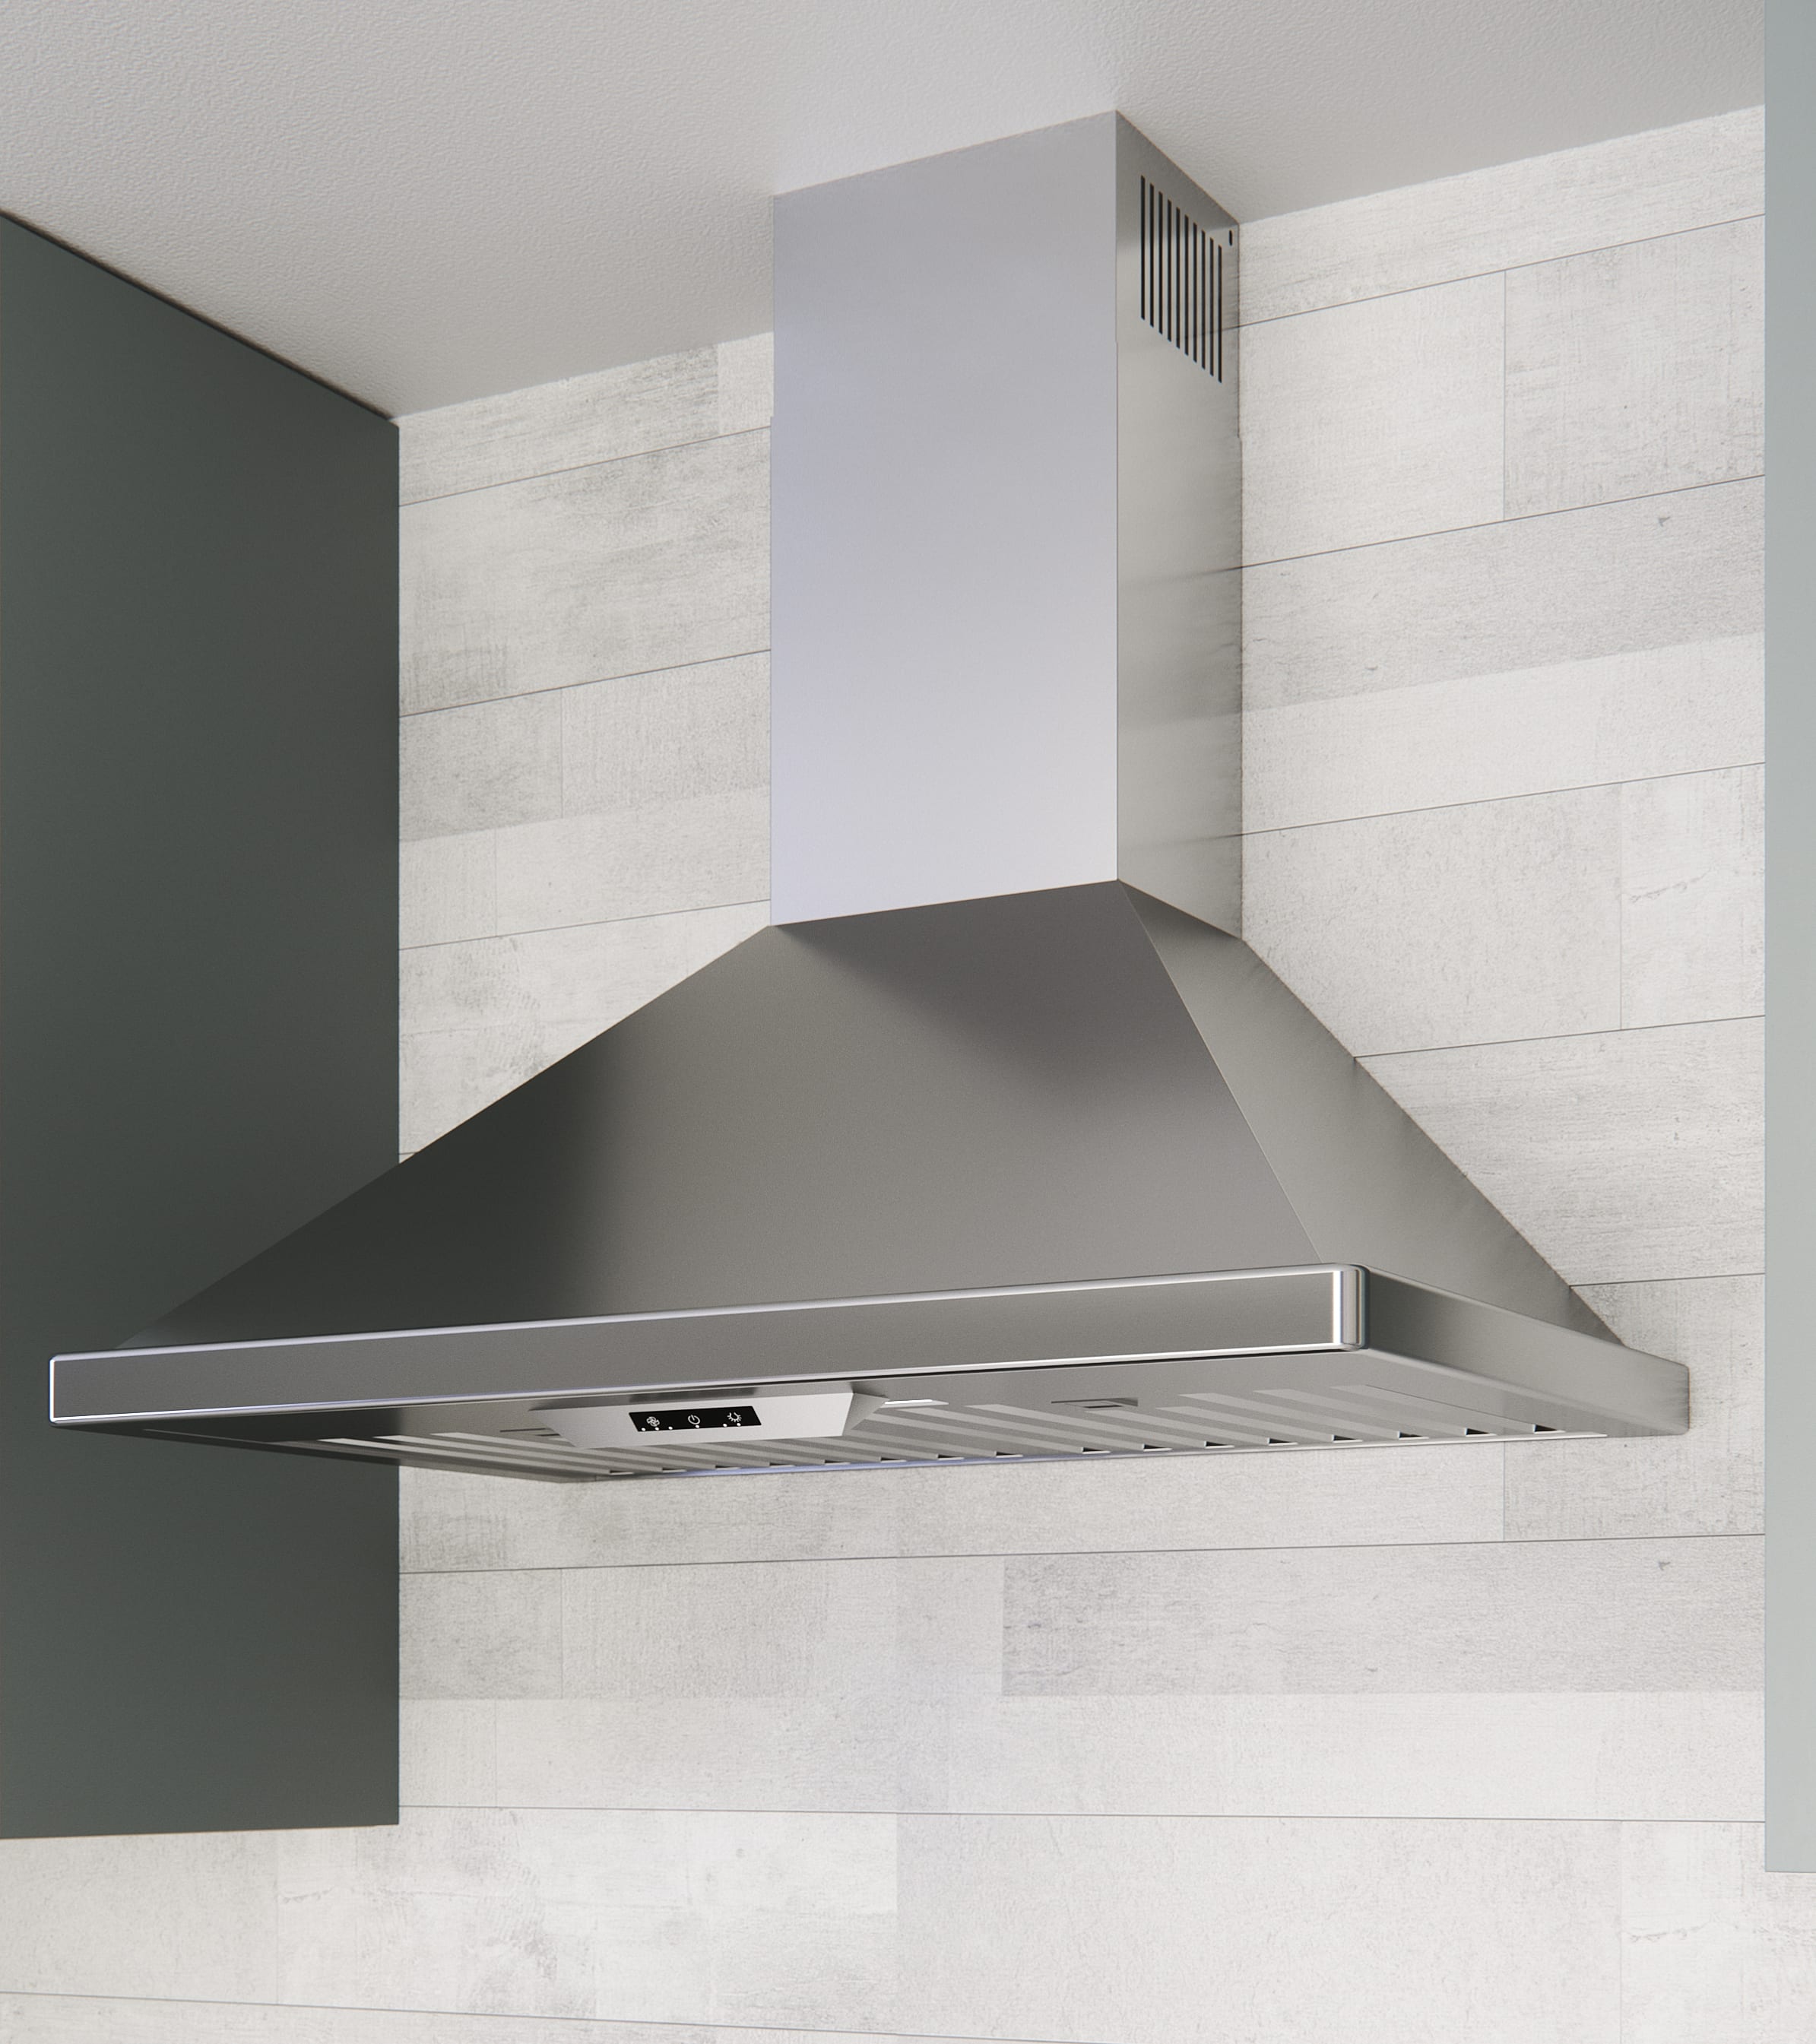 Miseno MH00136CS 750 CFM 36 Inch Stainless Steel Wall Mounted Range Hood with Dual Halogen Lighting System 